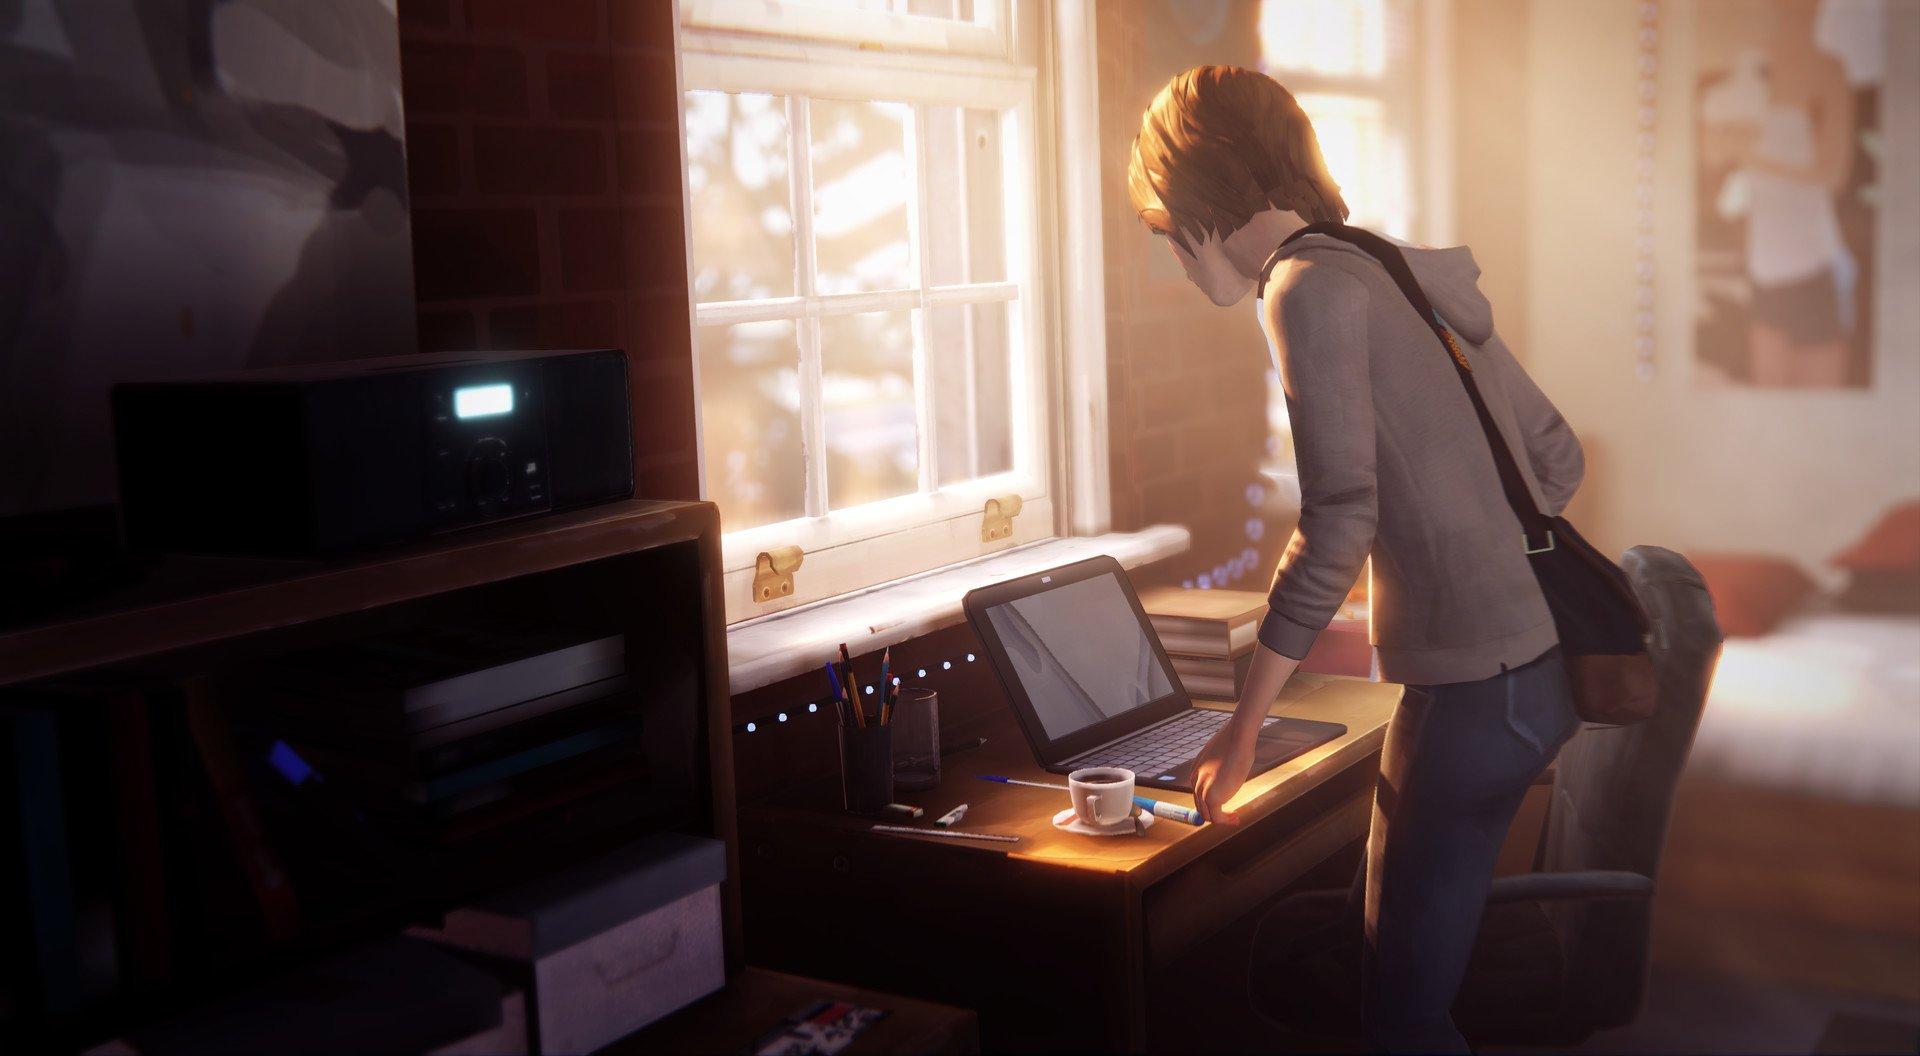 The next Life is Strange game is coming to consoles and PC on September 10th